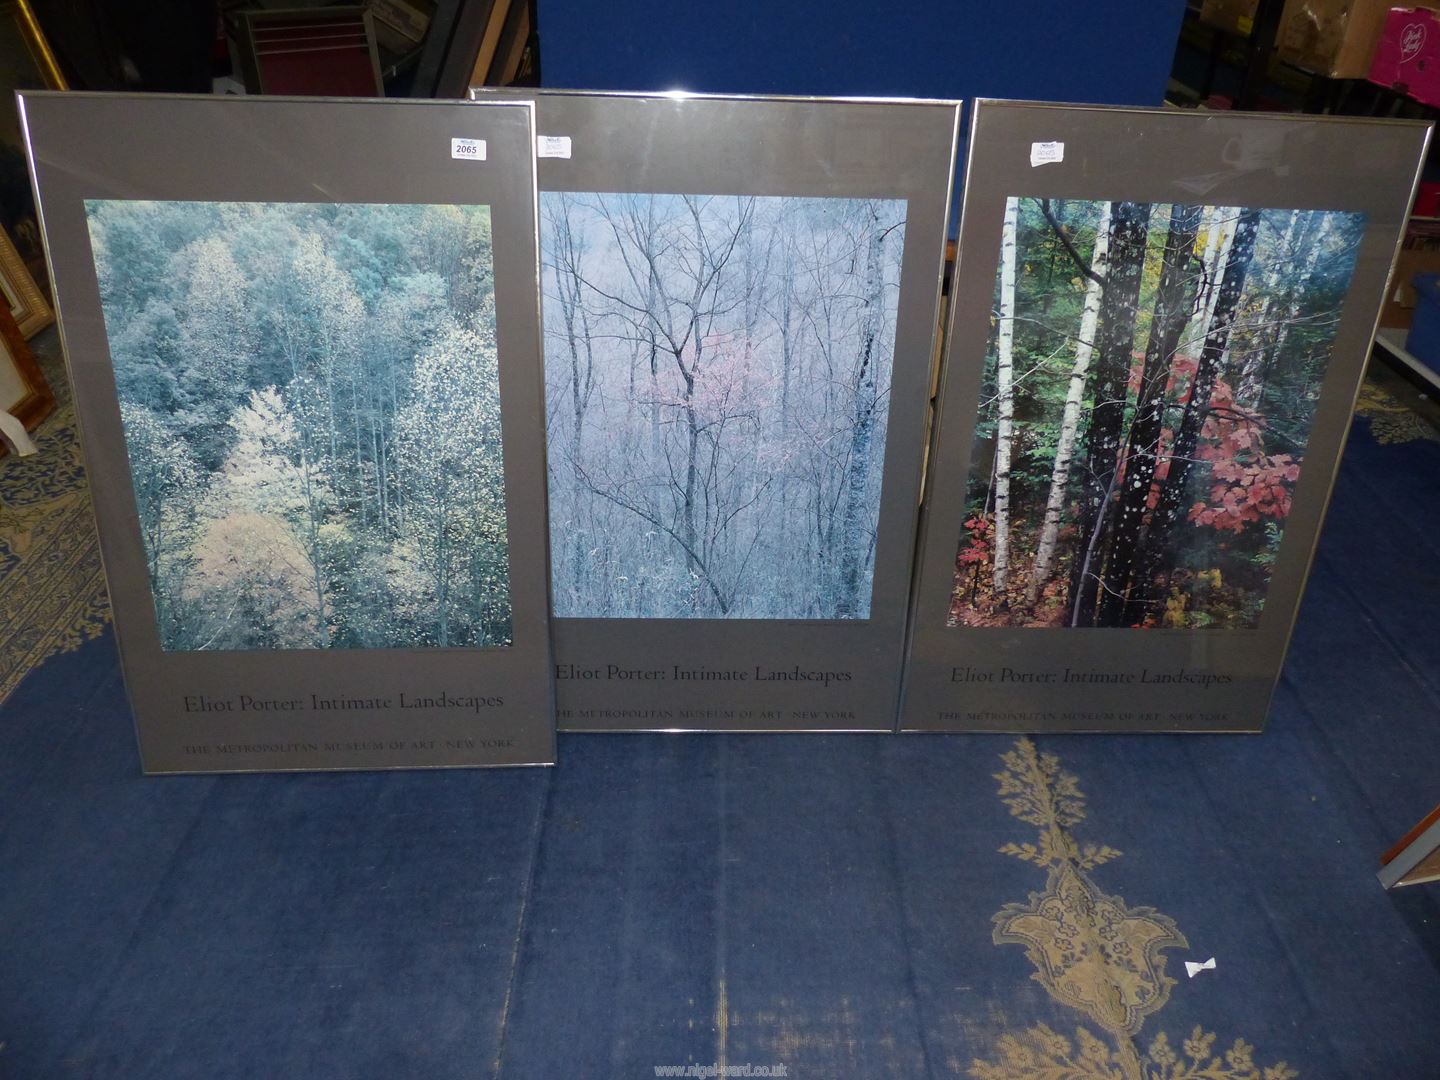 Three Eliot Porter 'Intimate Landscapes' photographs of forests, Met.